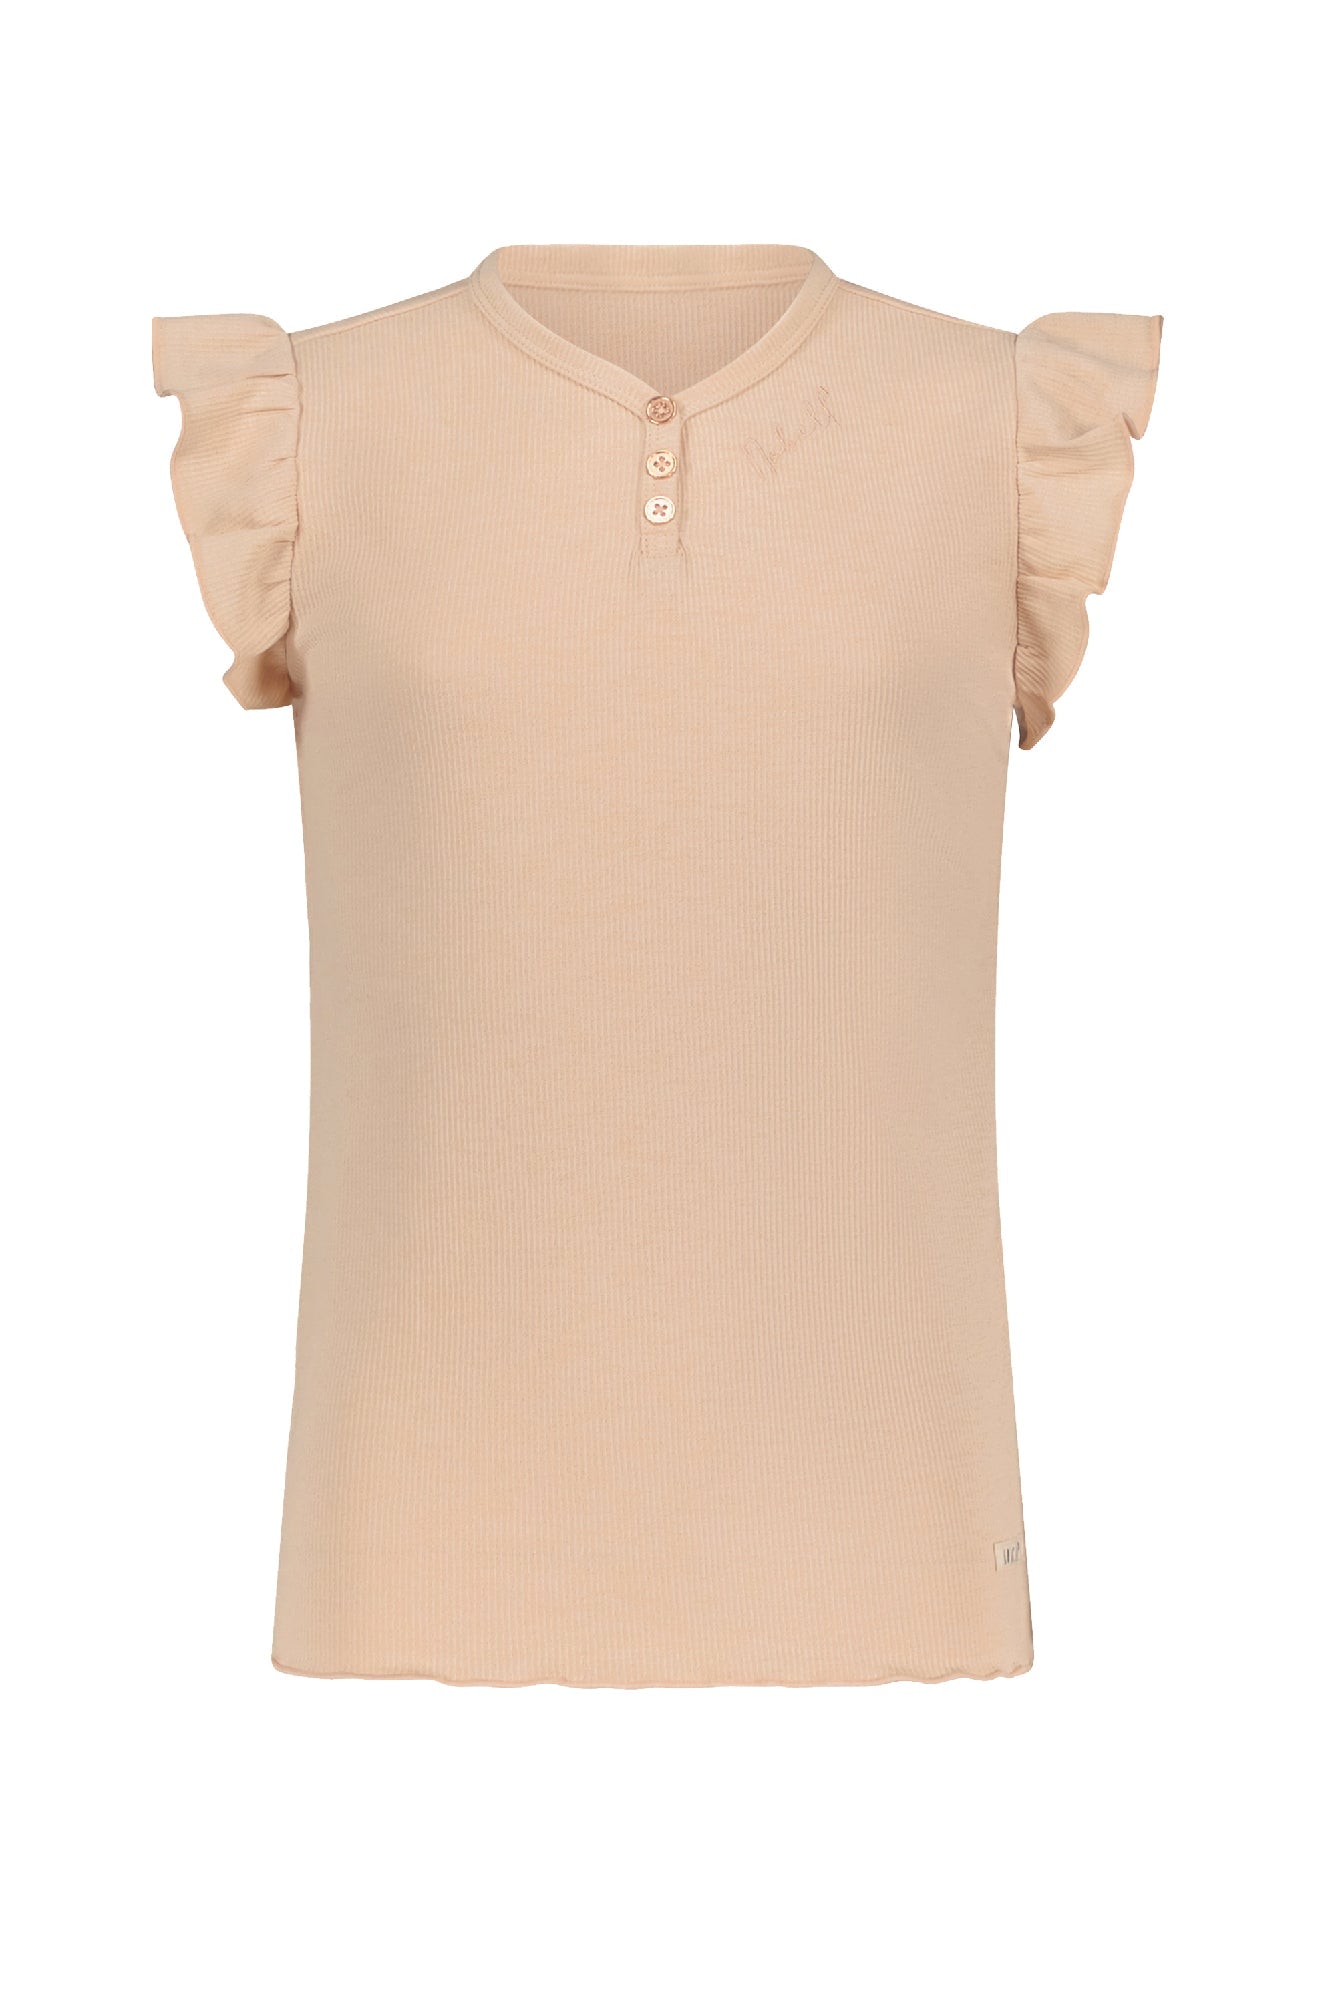 Meisjes Kiss rib jersey top cap sleeve with v-neck and 3 buttons at front van NoBell in de kleur Rosy Sand in maat 170-176.